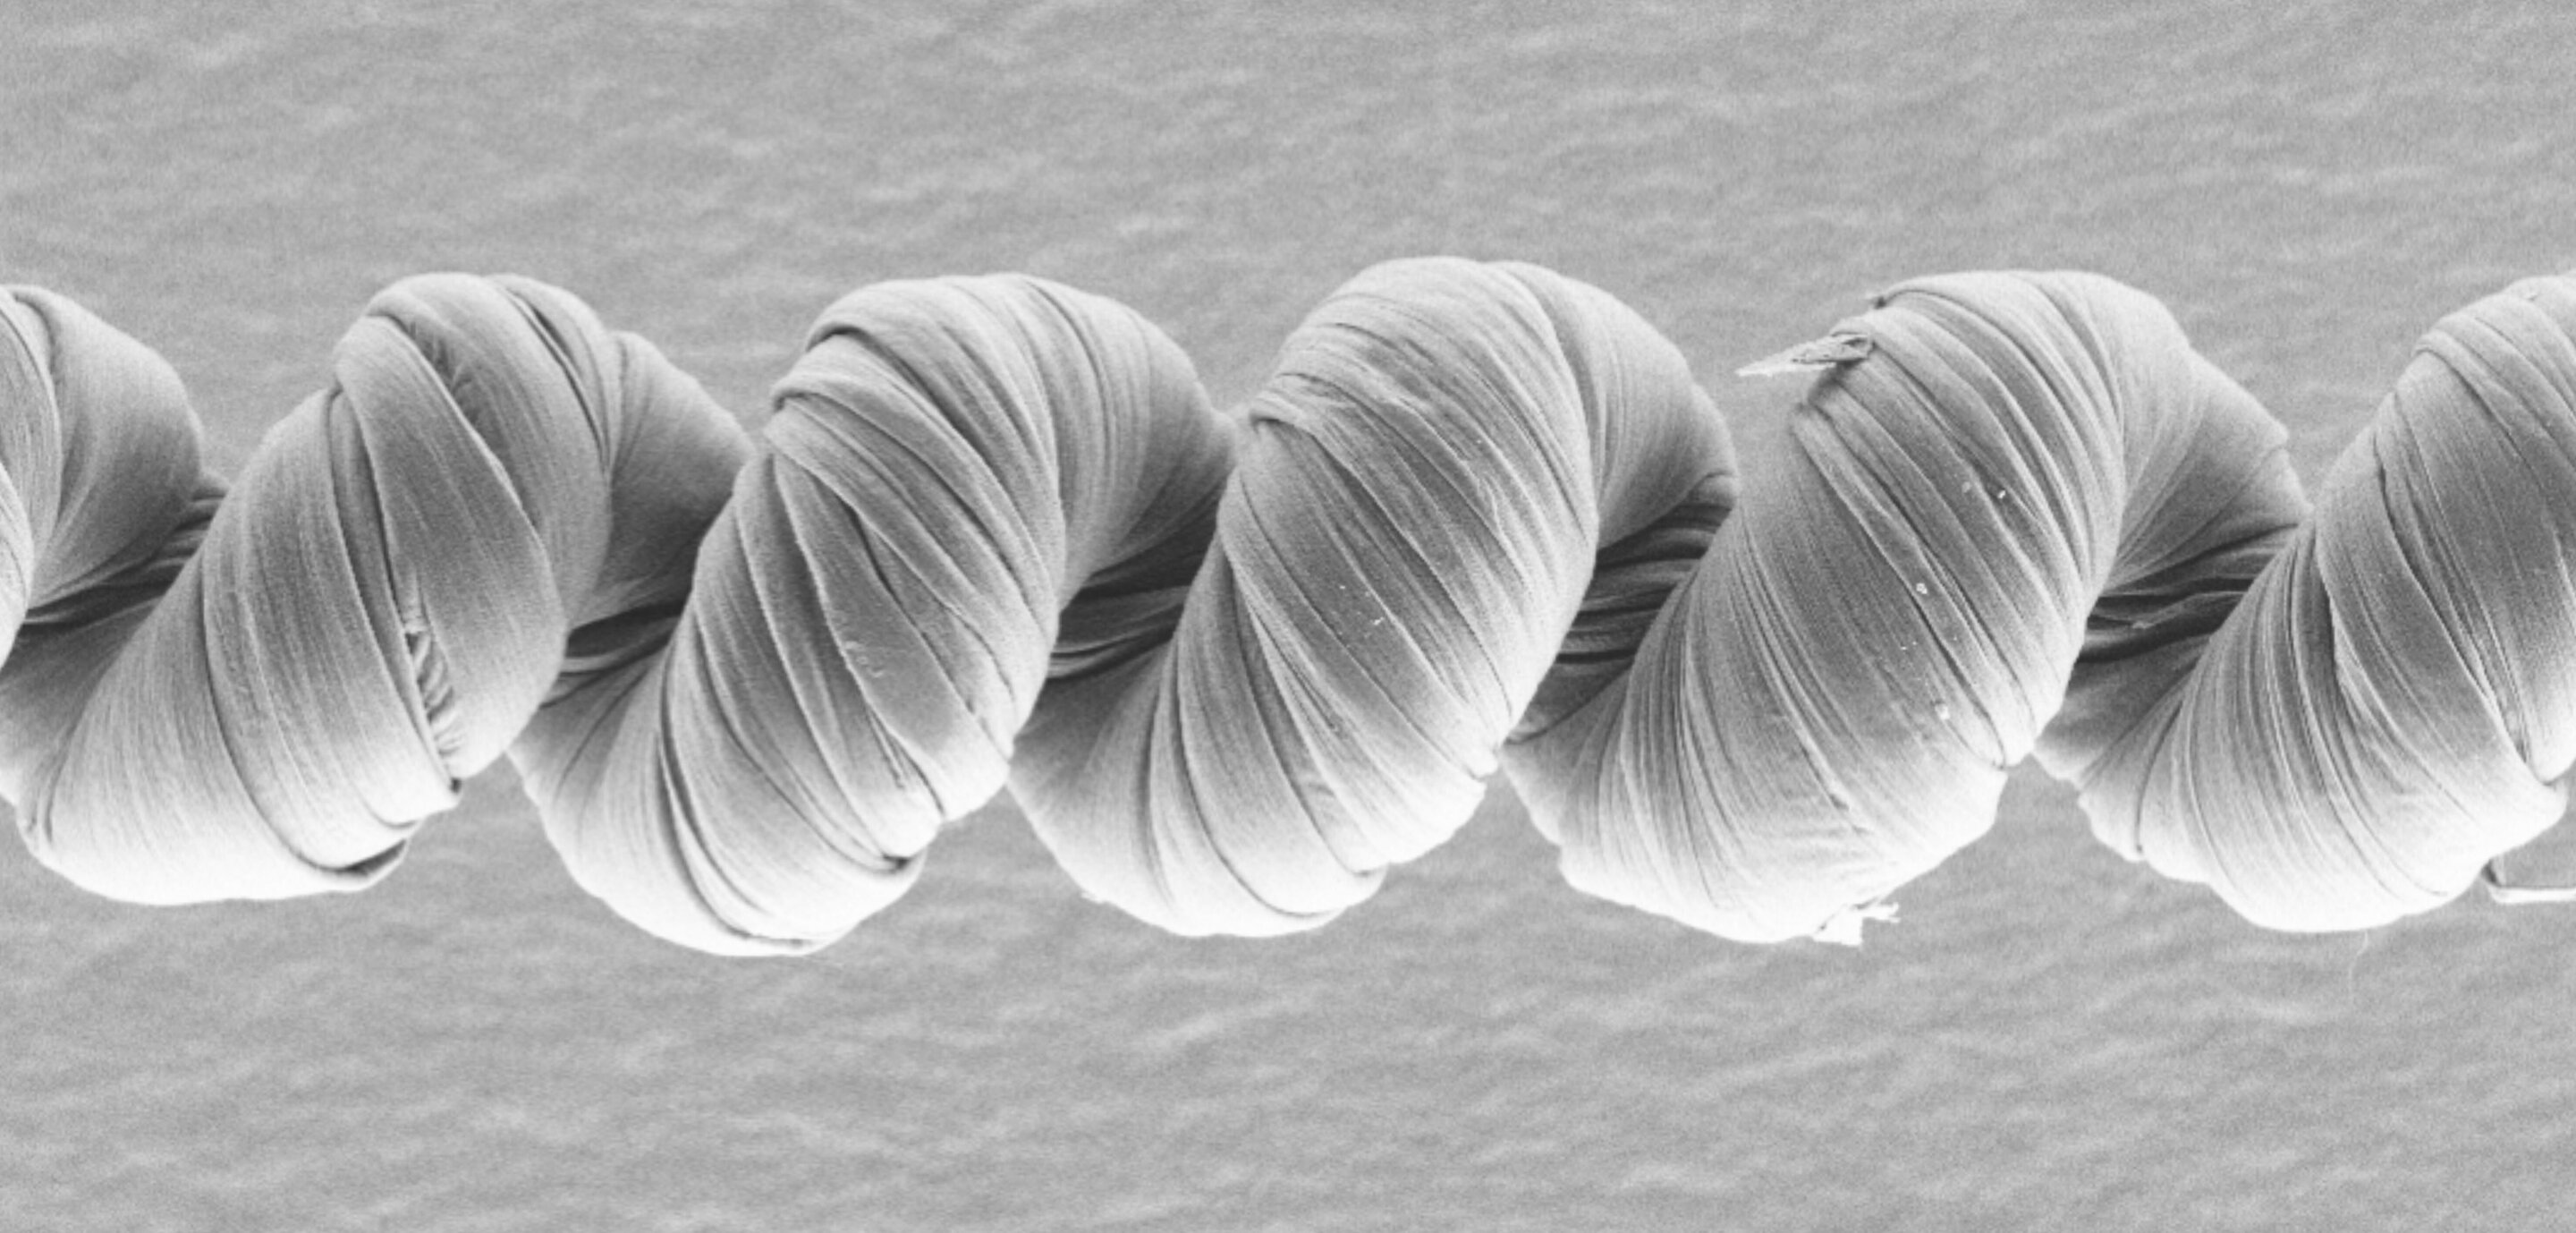 Researchers create powerful muscles from fishing line and sewing thread